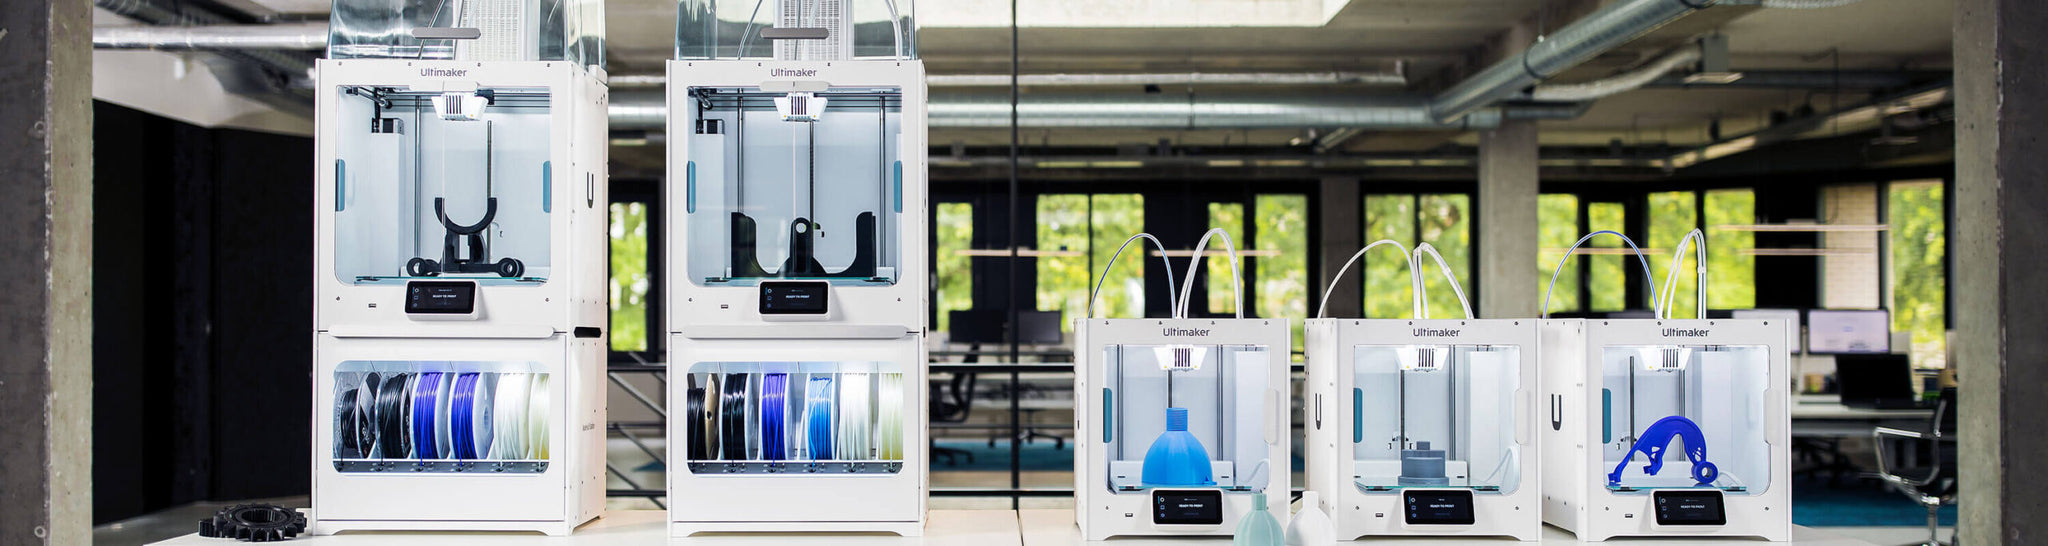 Company update: Ultimaker announces price adjustments